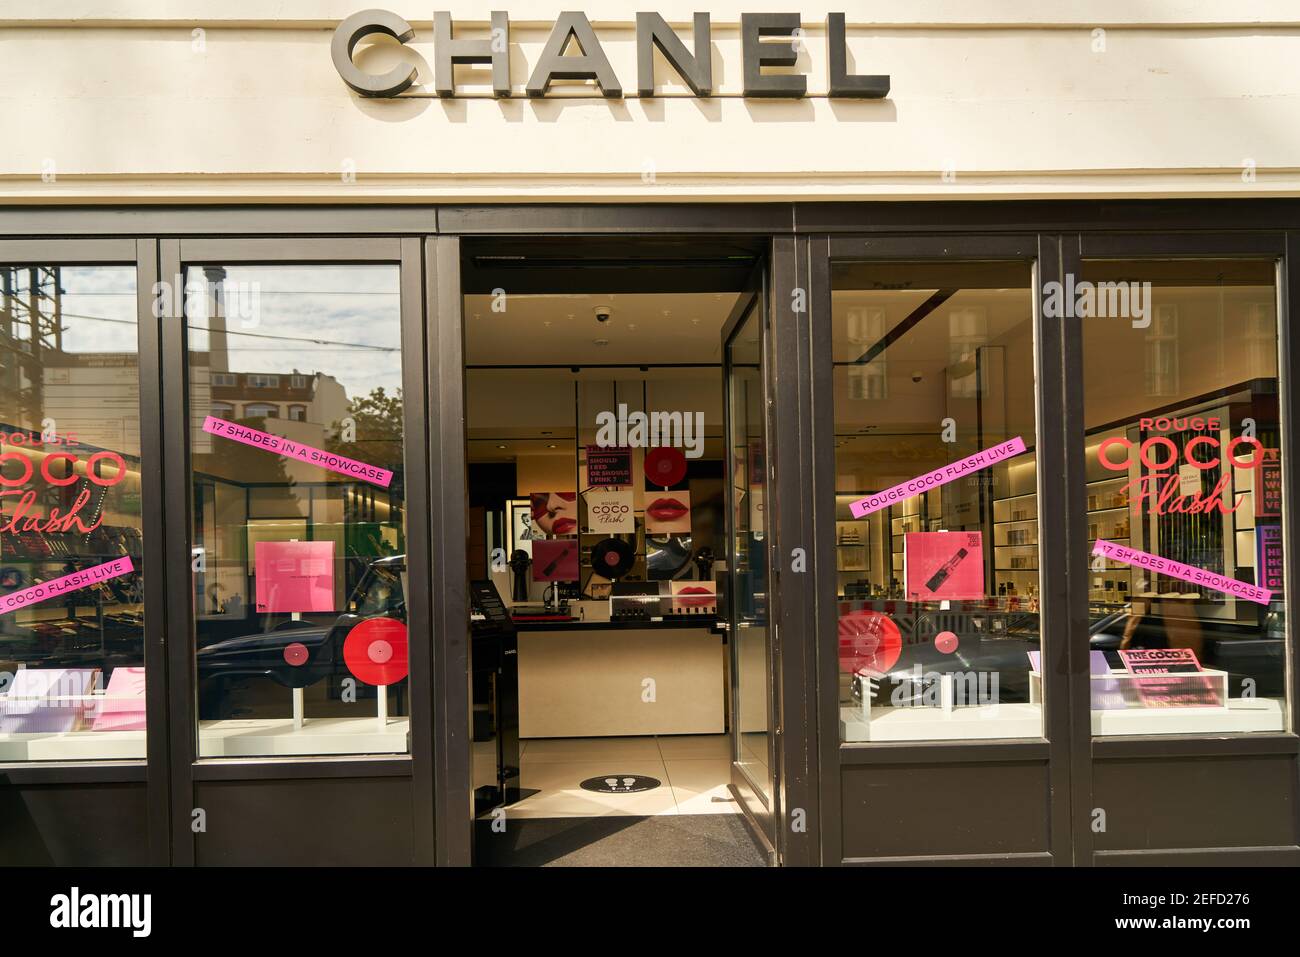 BERLIN, July 2020: Chanel brand store with open door at daytime Stock ...